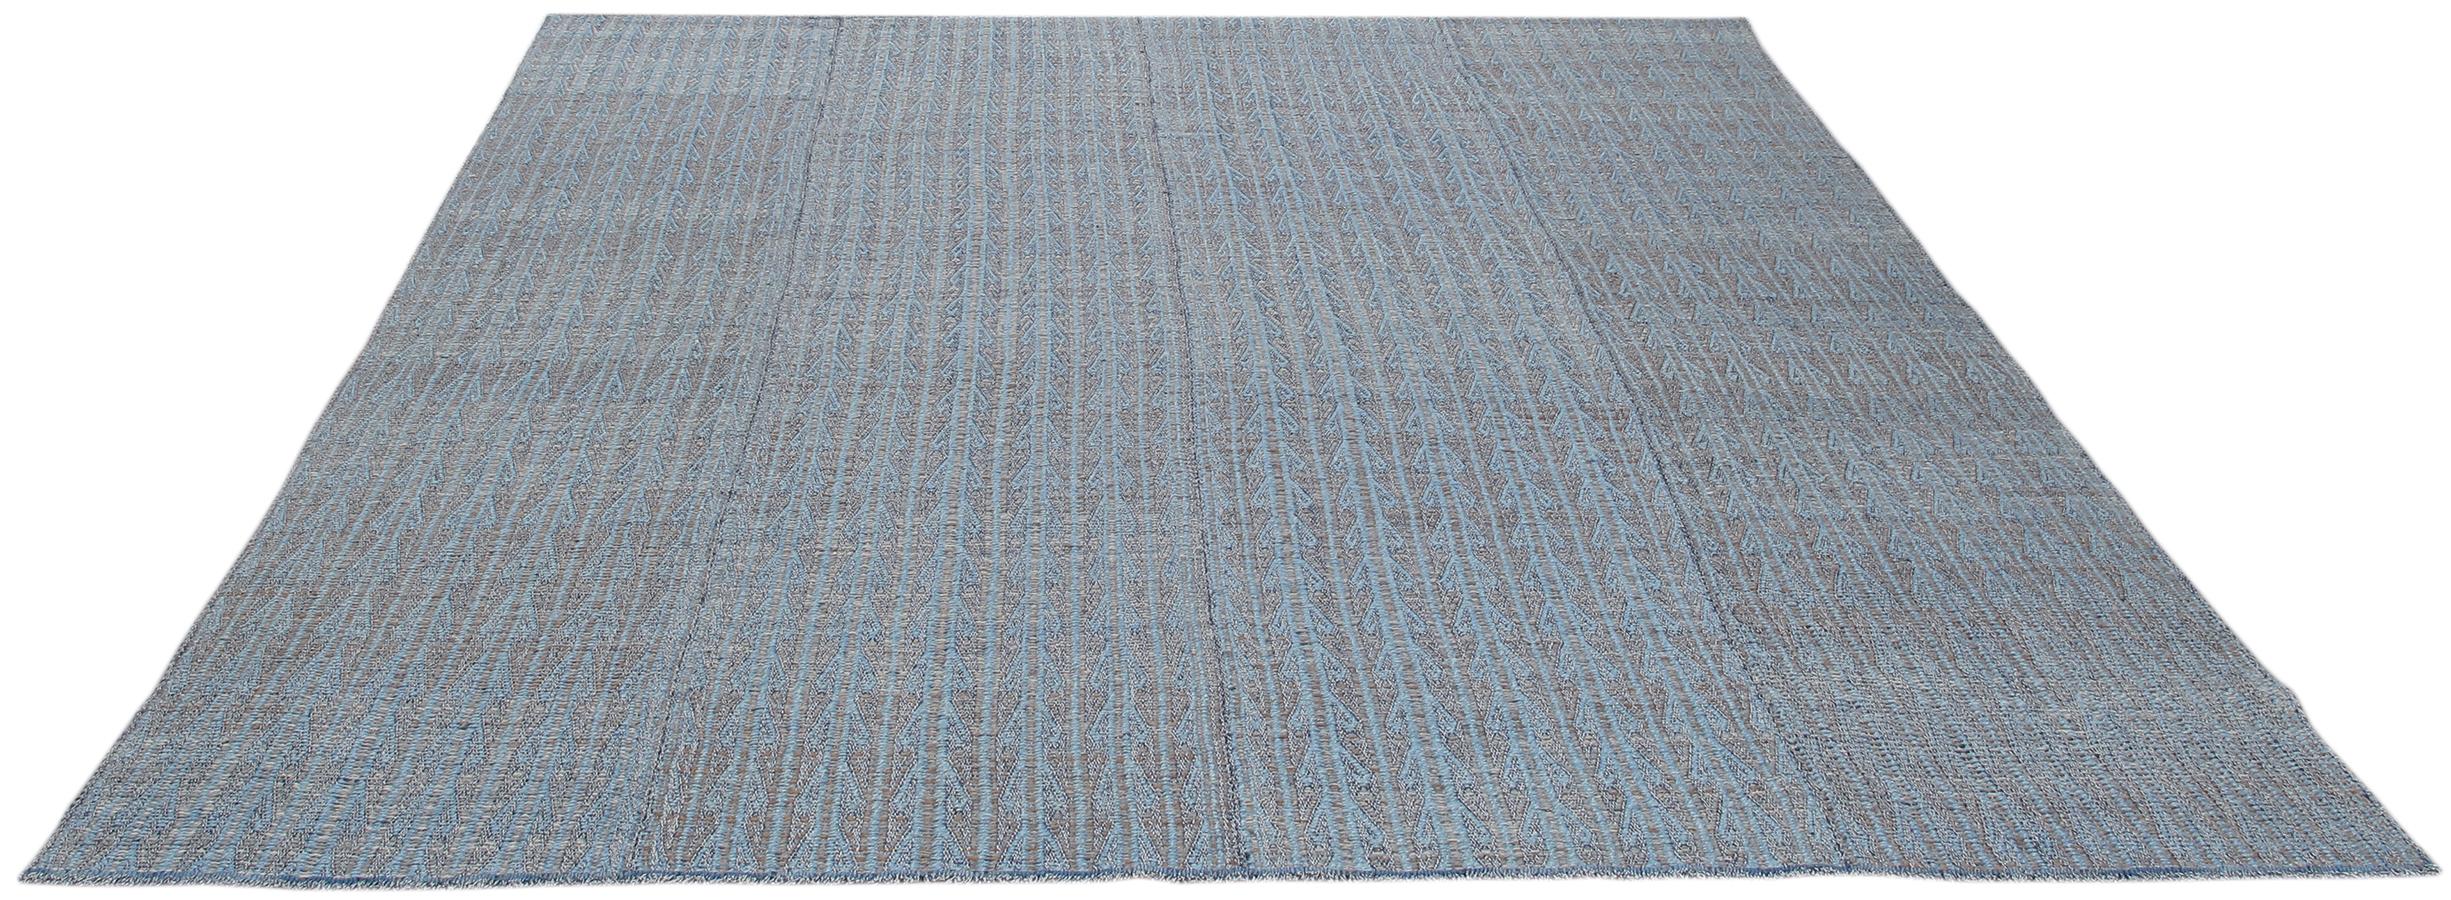 Turkish Ricci Handwoven Flat-Weave Tribal Blue Rug For Sale